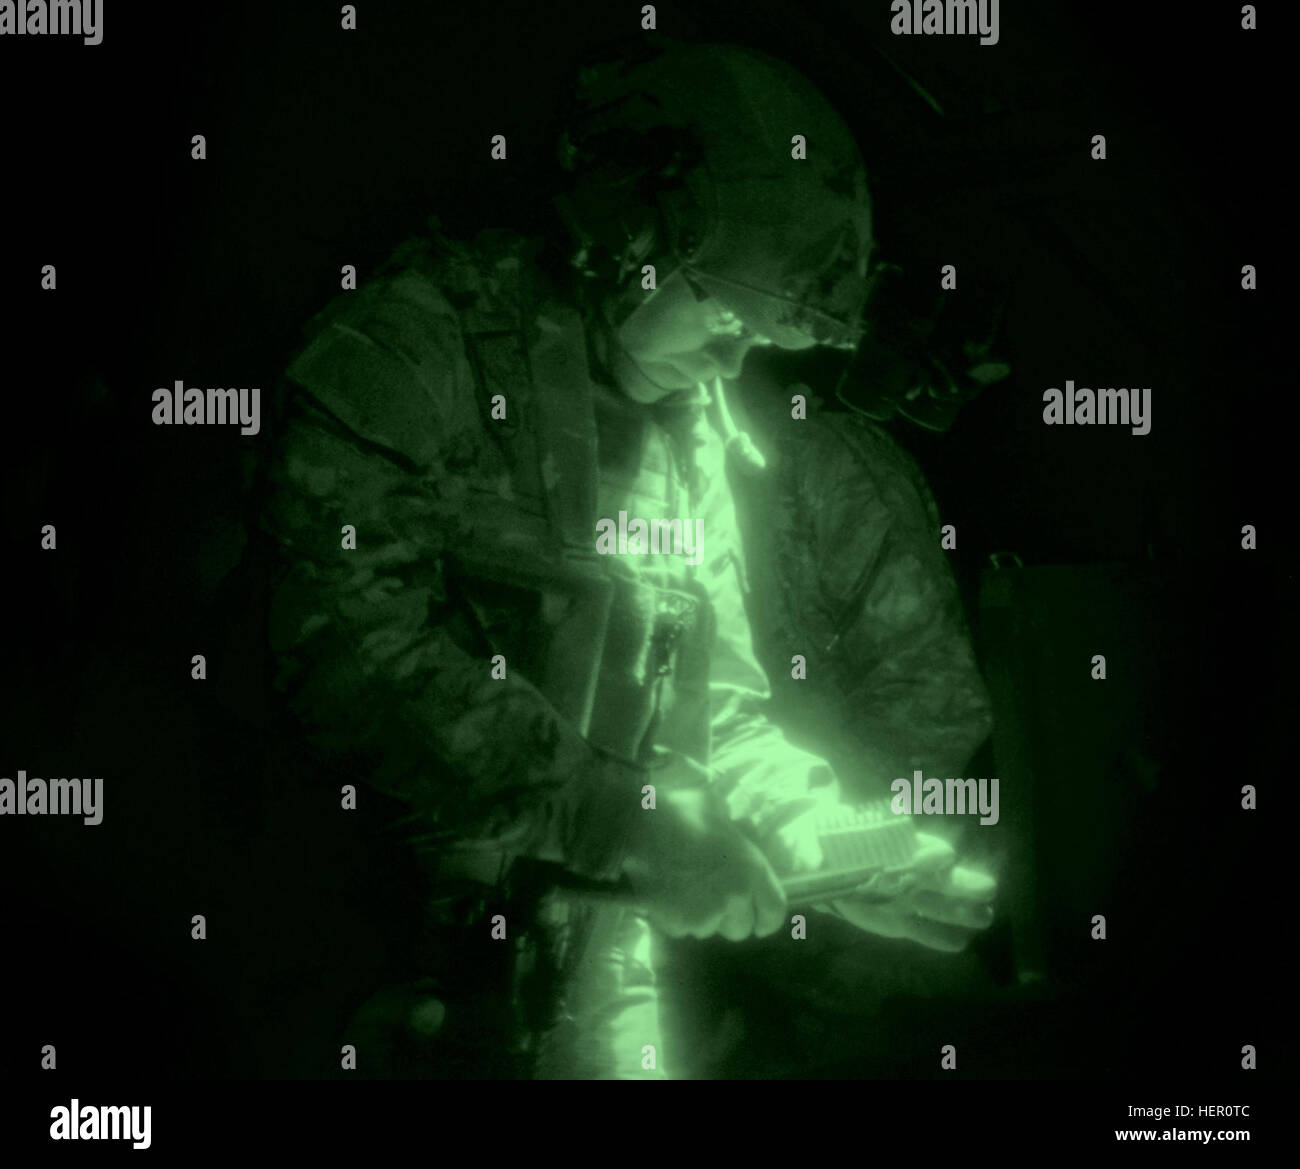 A U.S. Soldier assigned to 1-10th Special Forces Group reloads his ammunition during a weapons training exercise in which the participants were required to rely solely on night vision goggles to see inside the darkened shooting range. This training exercise was held at an indoor shooting range located on Panzer Kaserne, Boeblingen, Germany, Nov. 10, 2016. (U.S. Army photo by Visual Information Specialist Jason Johnston) U.S. Army Special Forces Indoor Weapons Training 161110-A-RY767-111 Stock Photo